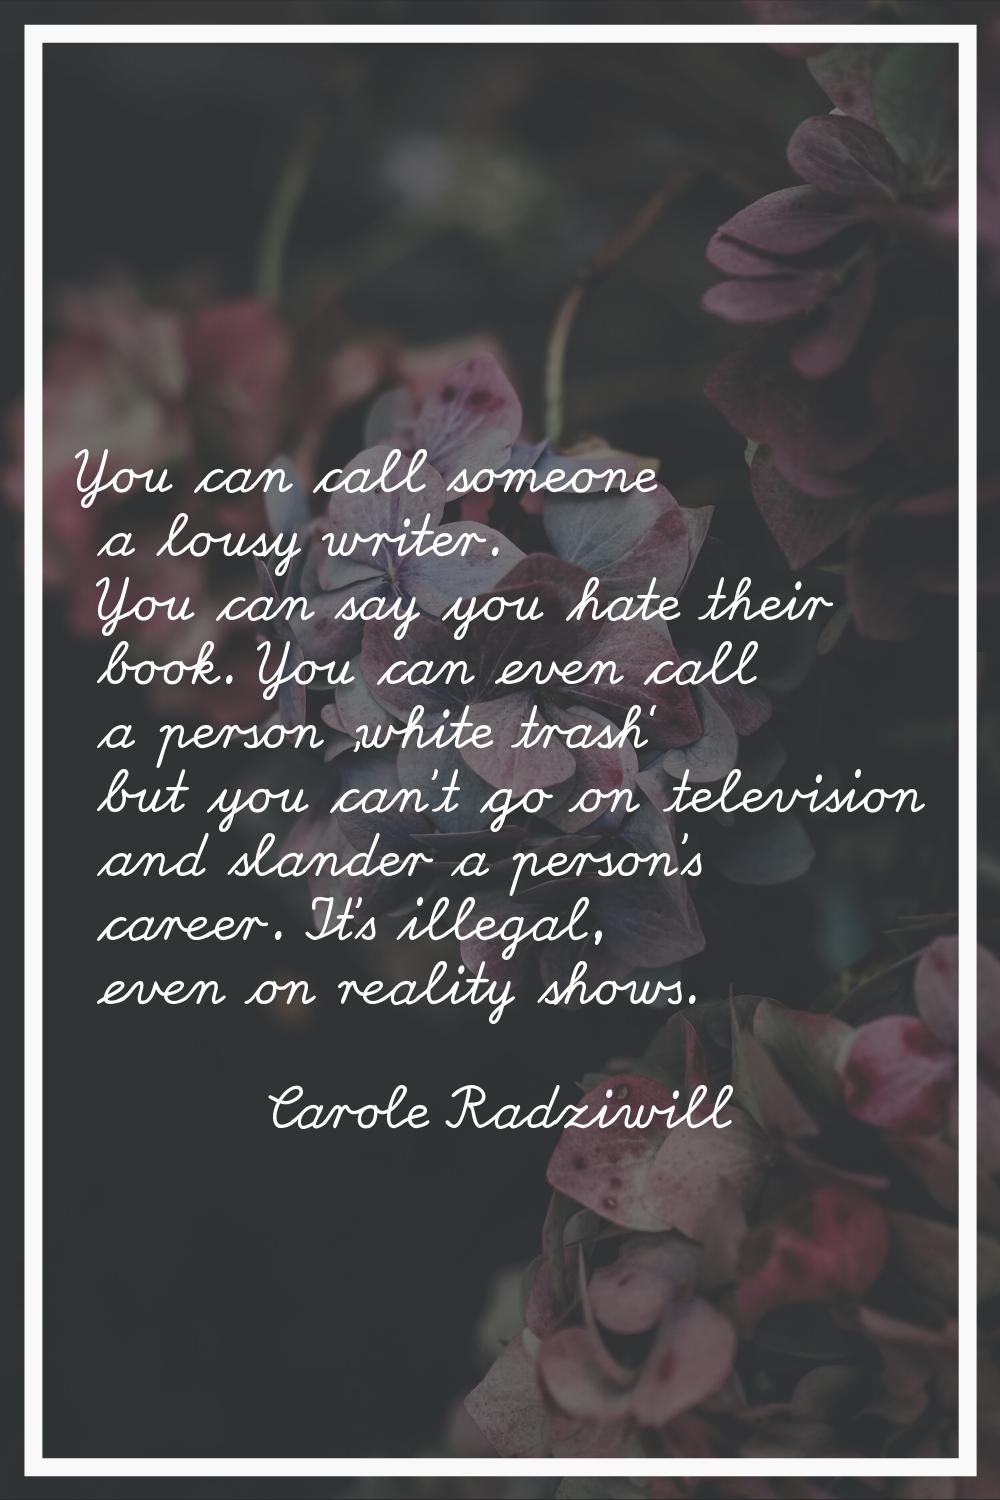 You can call someone a lousy writer. You can say you hate their book. You can even call a person 'w